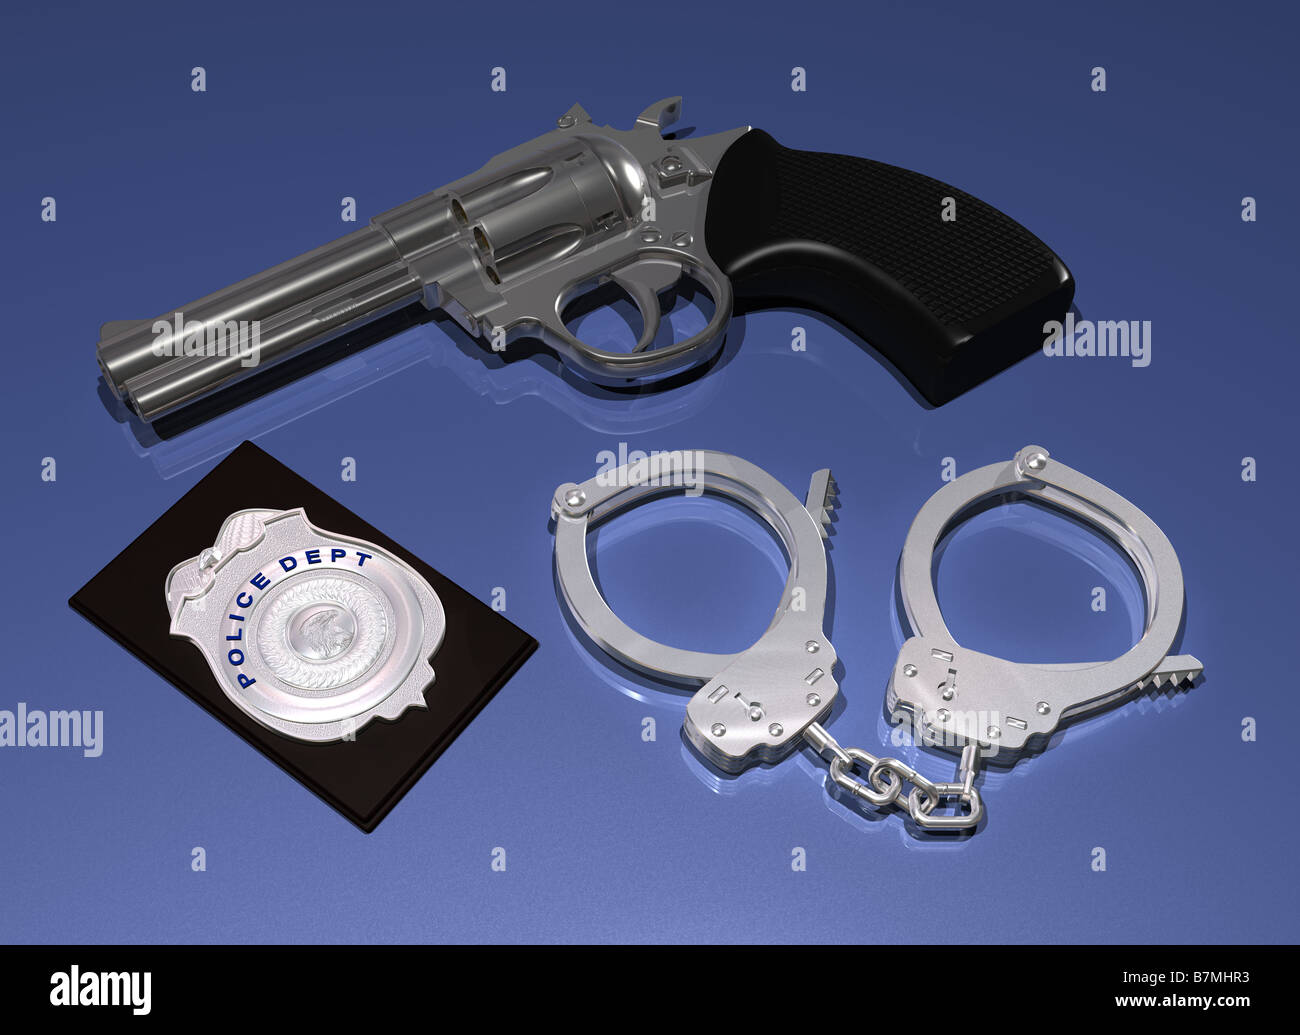 Illustration of a police gun badge and pair of handcuffs on a blue background Stock Photo